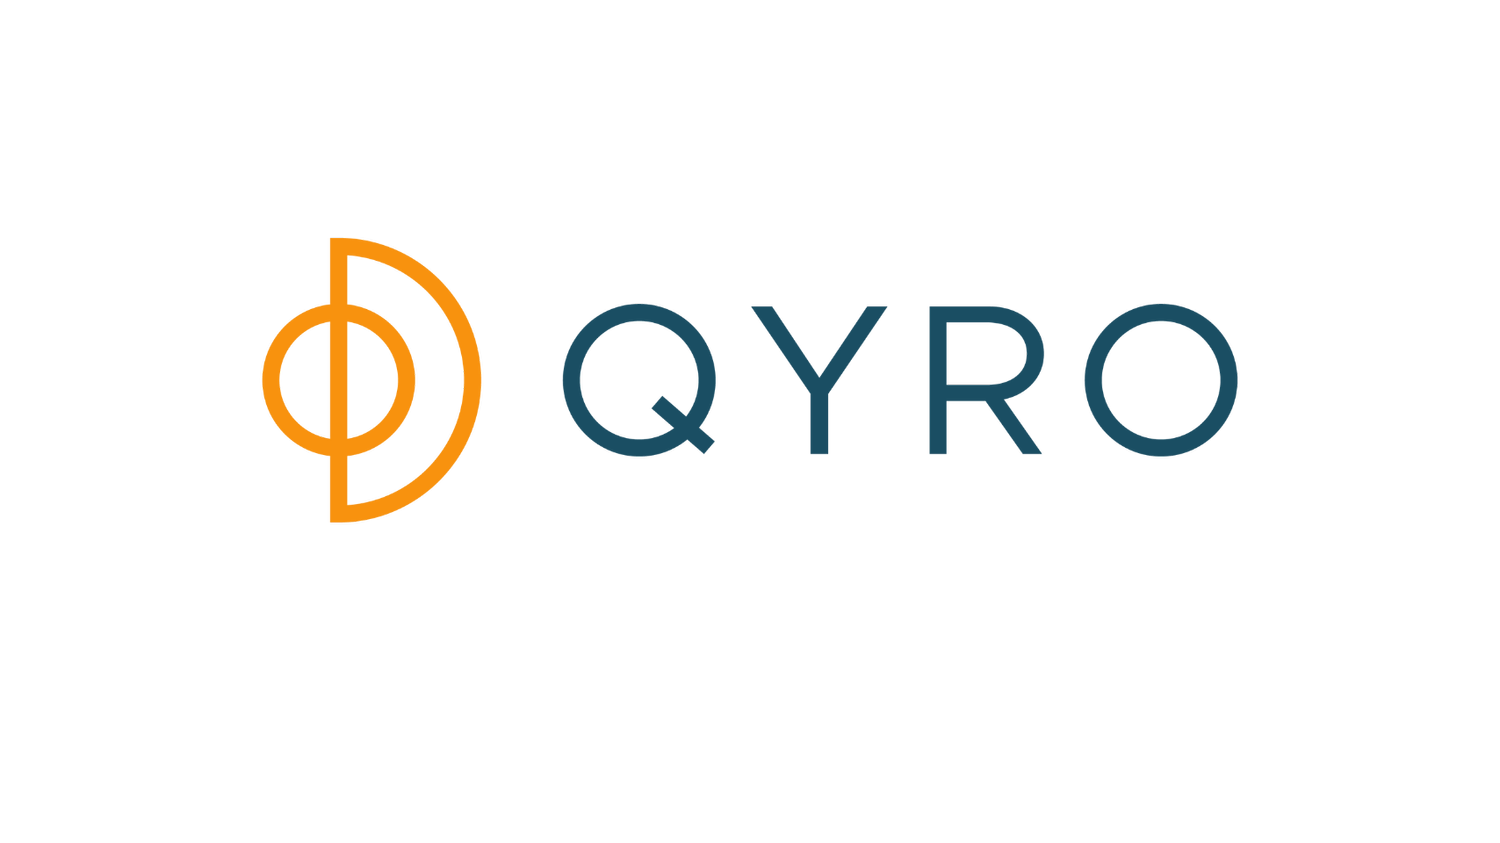 QYRO - By Leaders. For Leaders.